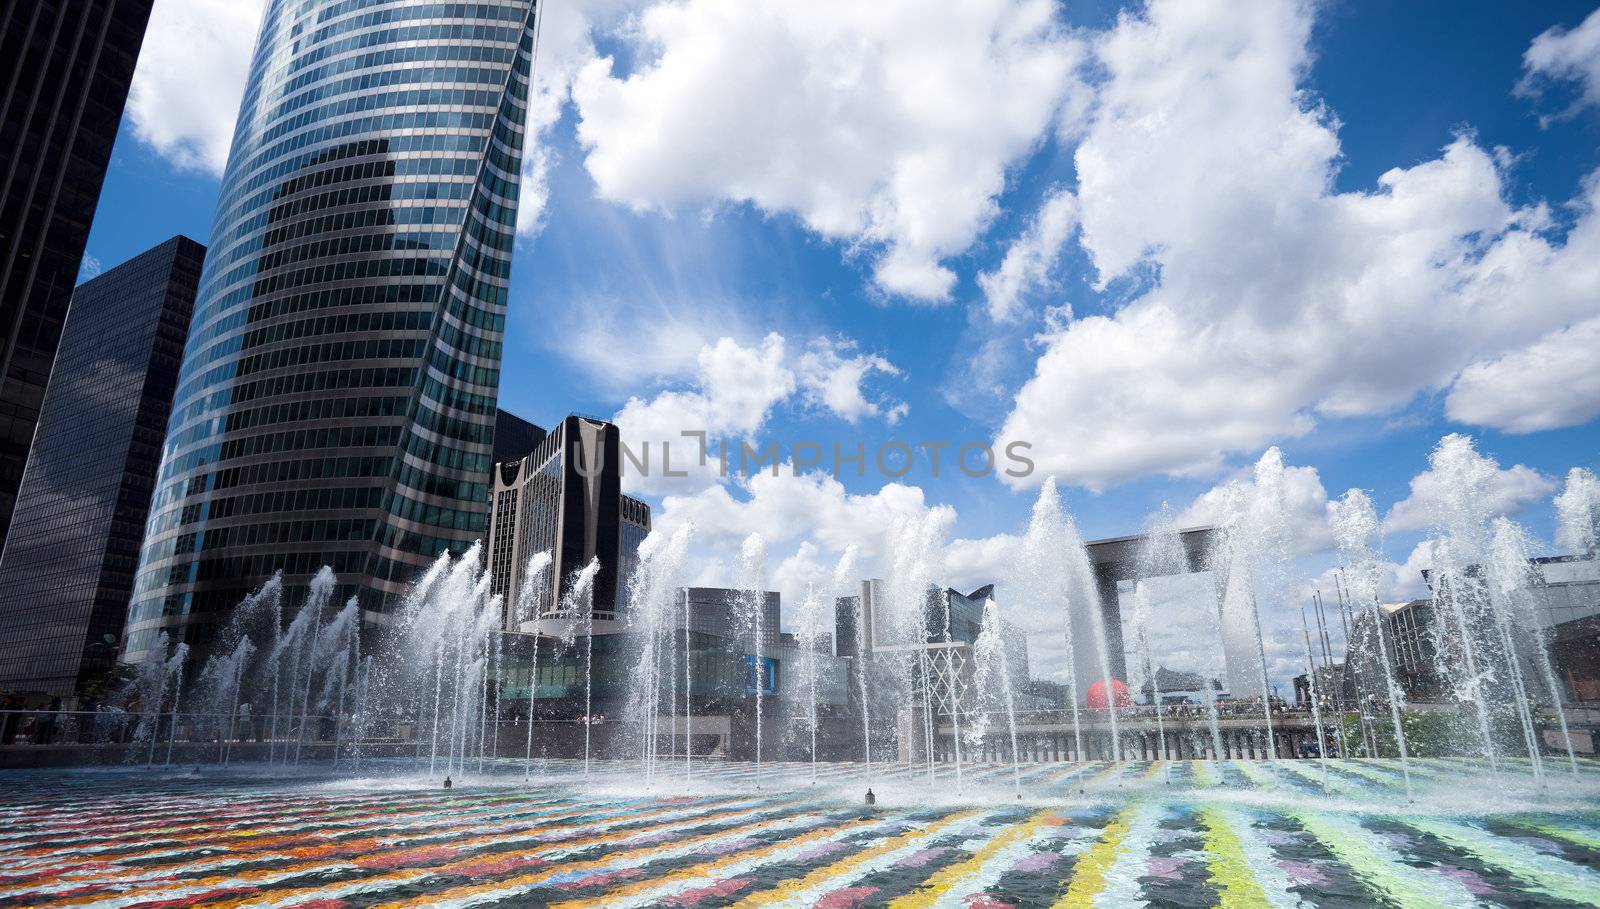 View of fountains in La Defence district, Paris